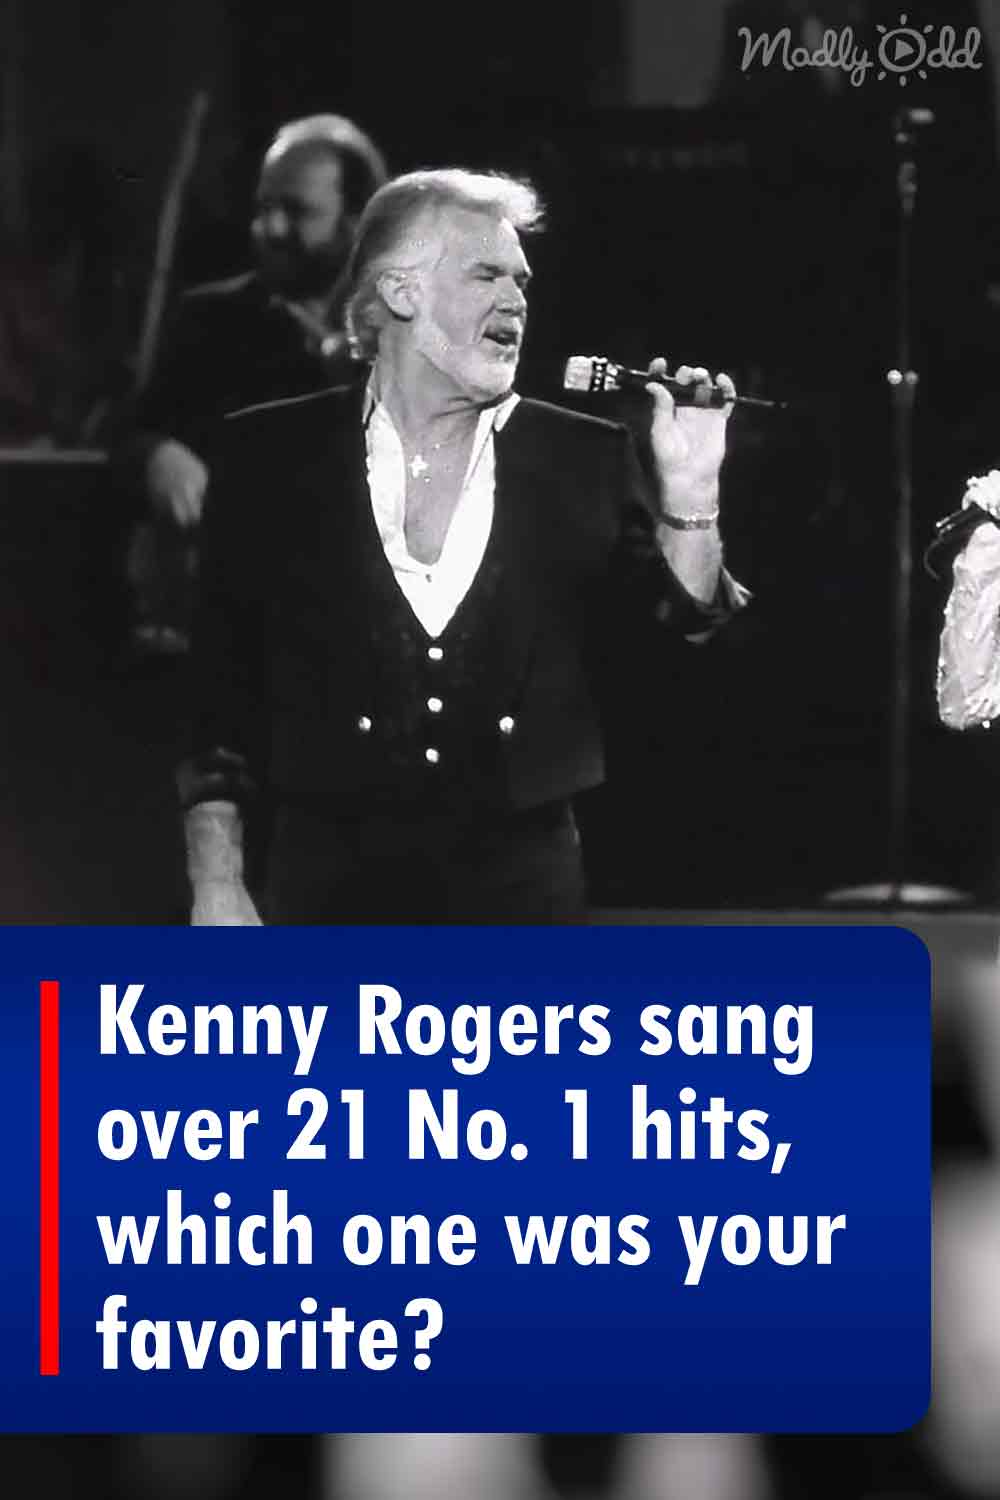 Kenny Rogers sang over 21 No. 1 hits, which one was your favorite?